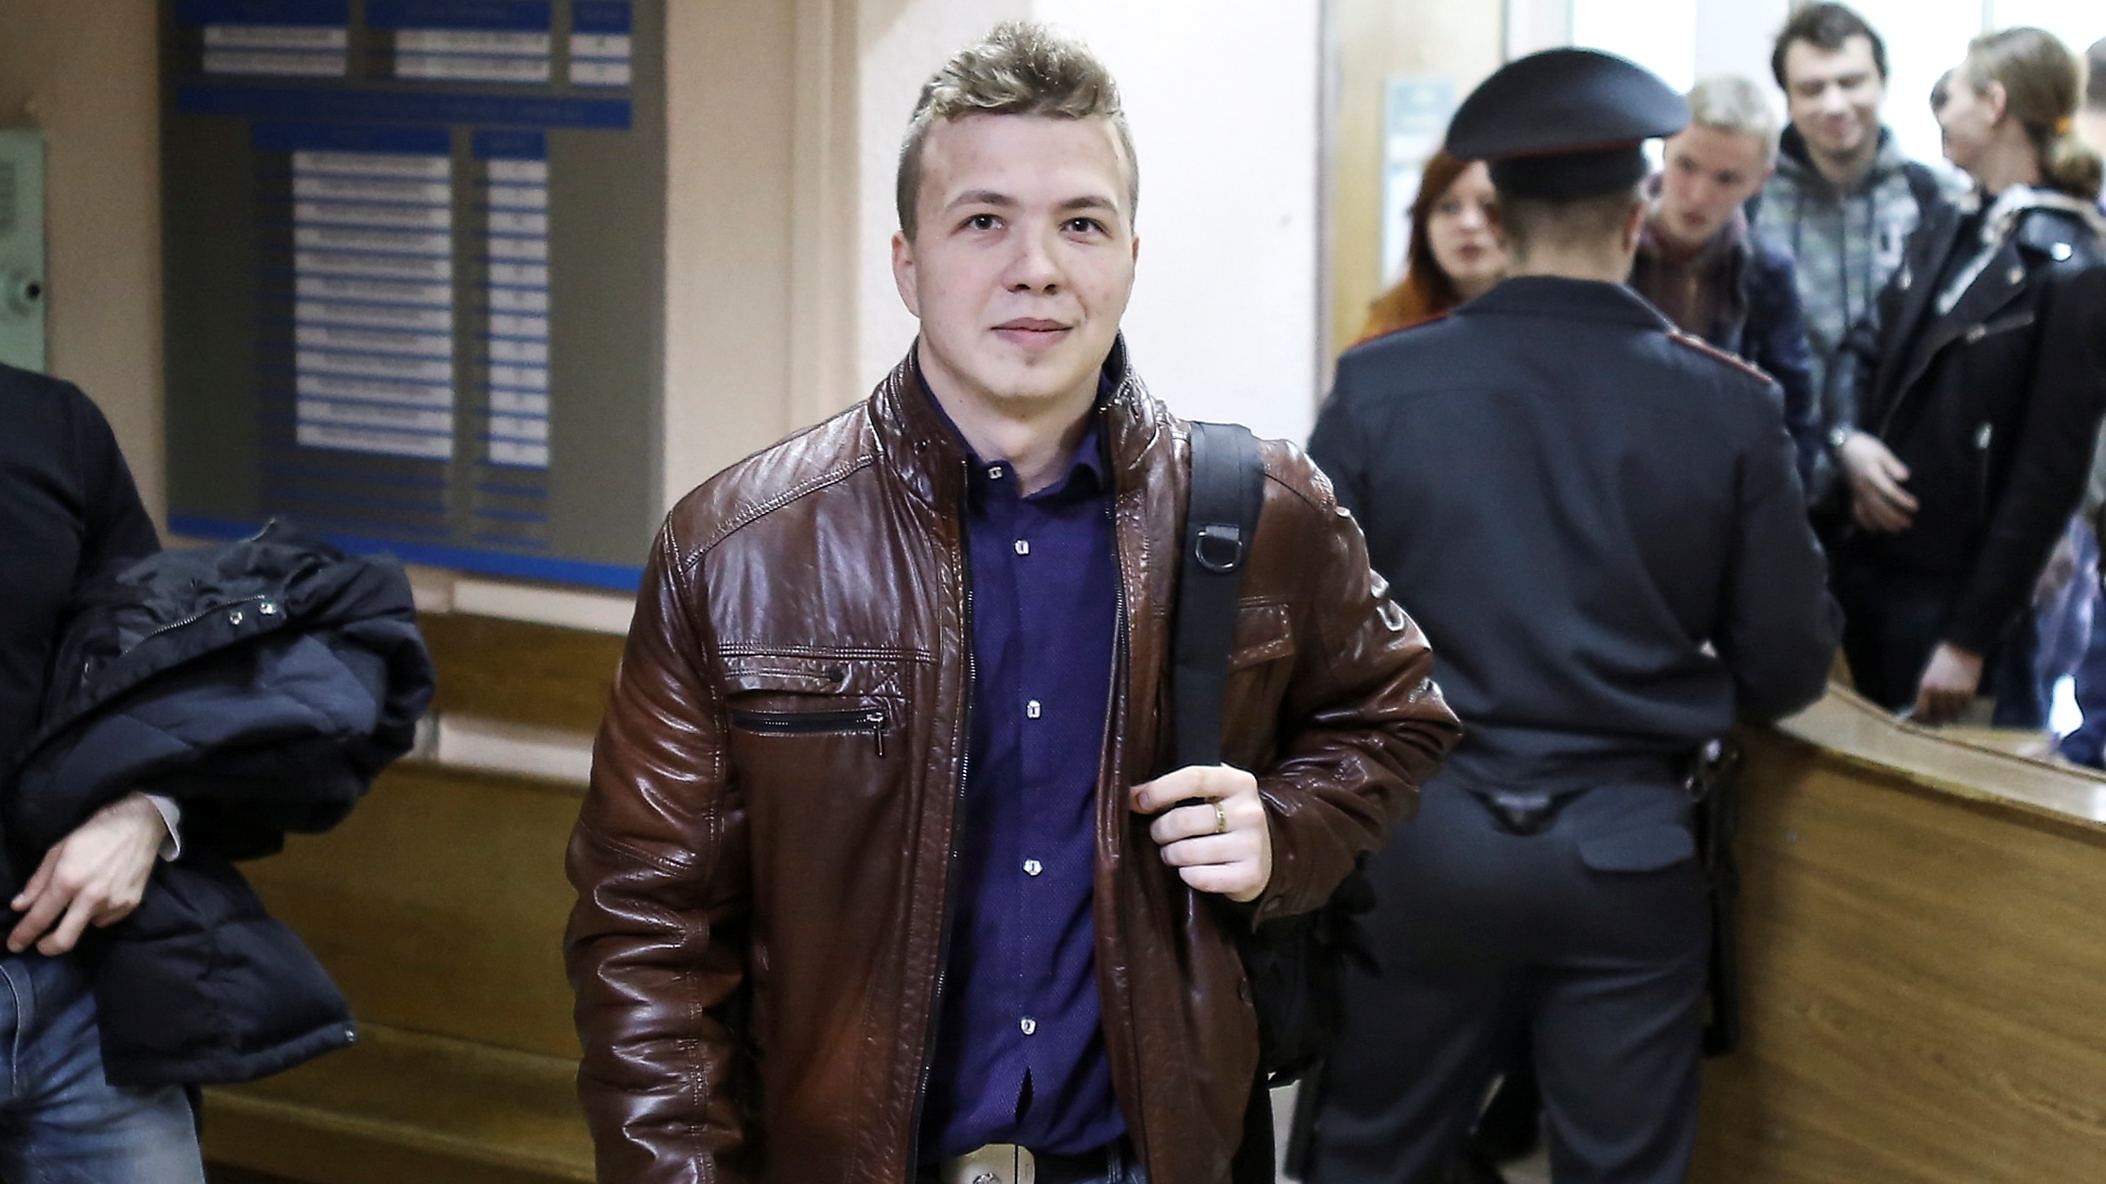 Protasevich last year worked as an editor at the Poland-based Nexta Live channel which is based on the Telegram messenger app and has over 1 million subscribers. Opposition blogger and activist Roman Protasevich arrives for a court hearing in Minsk in 2017. Credit: Reuters File Photo